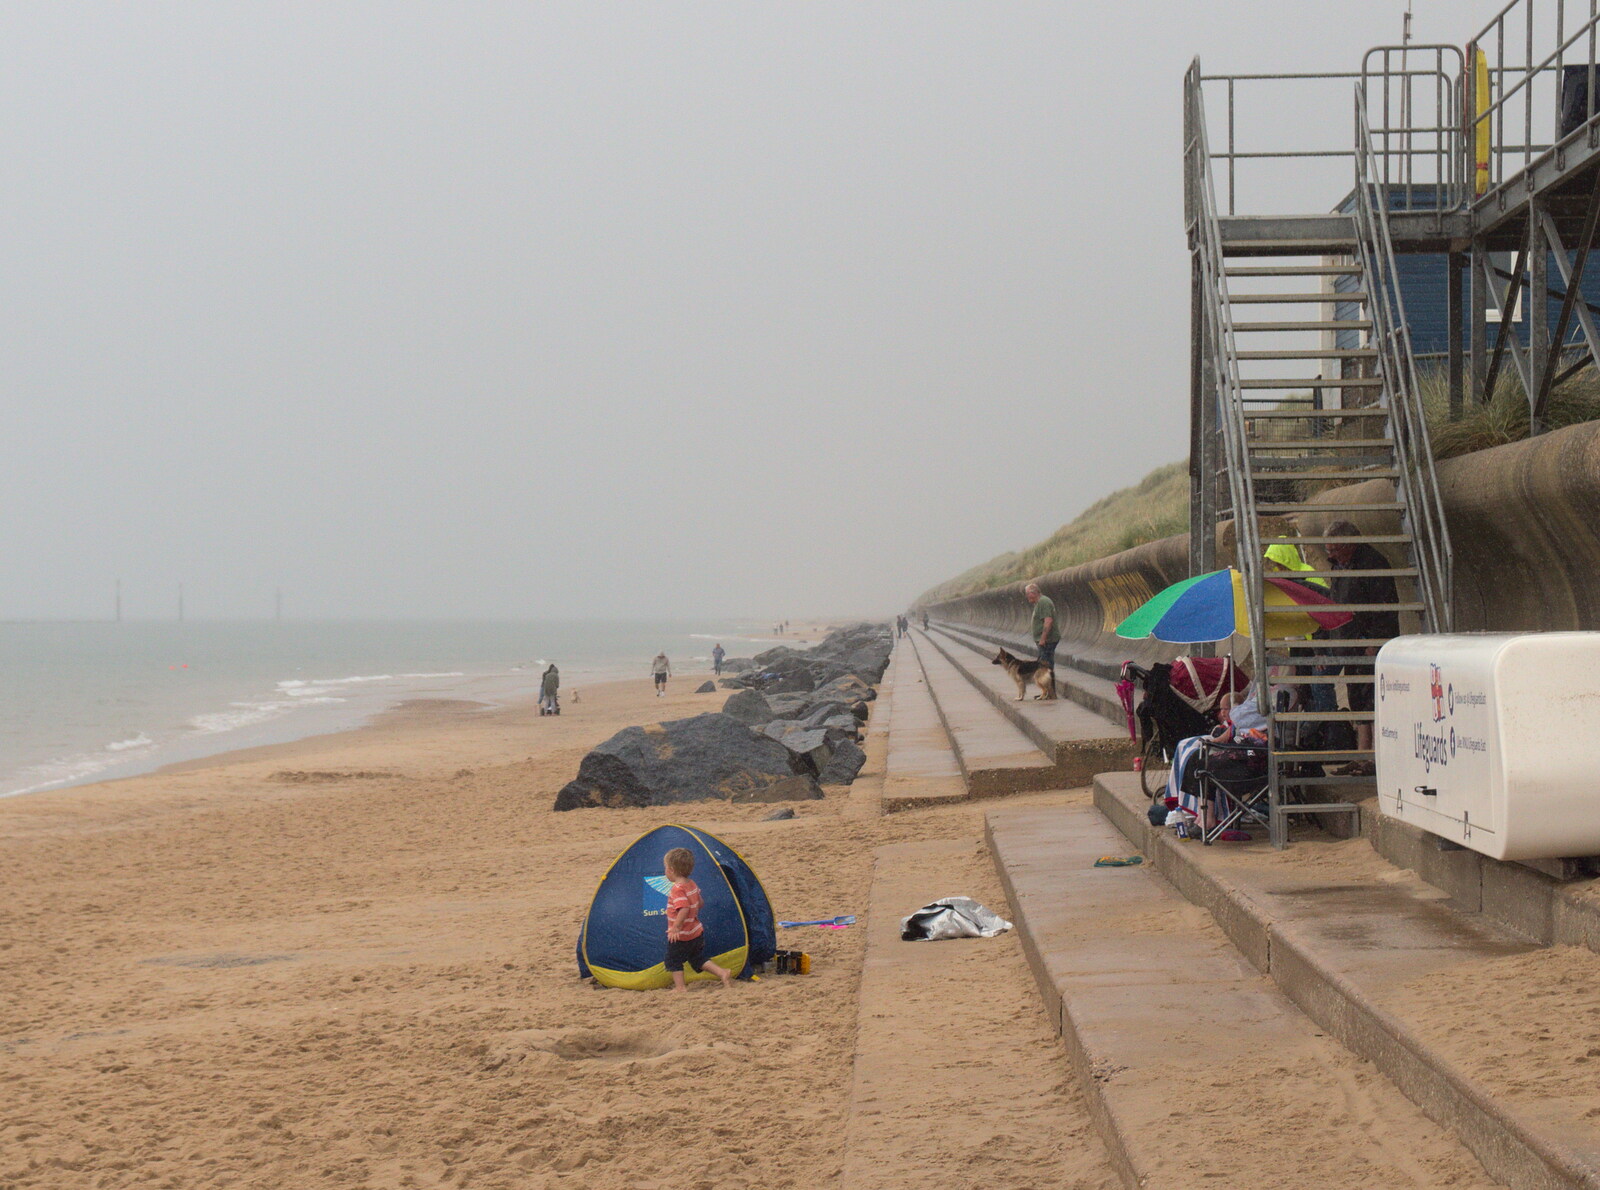 Brave beach-goers brave the rain under umbrellas from A Wet Day at the Beach, Sea Palling, Norfolk - 16th July 2017